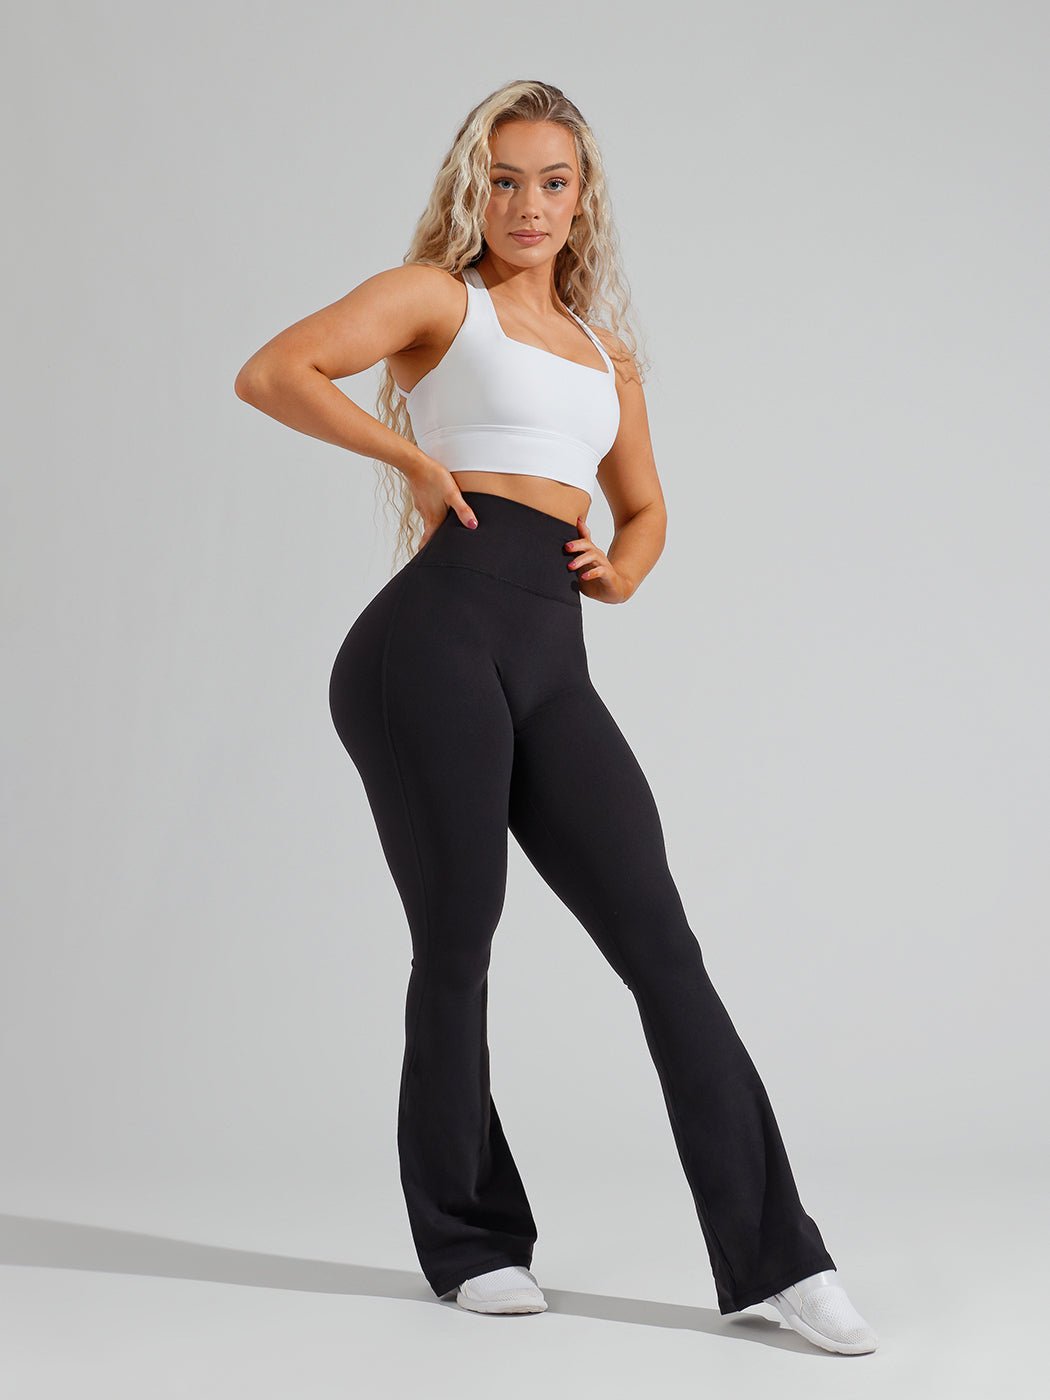 Flared Leggings Outfit Pinterest | International Society of Precision  Agriculture